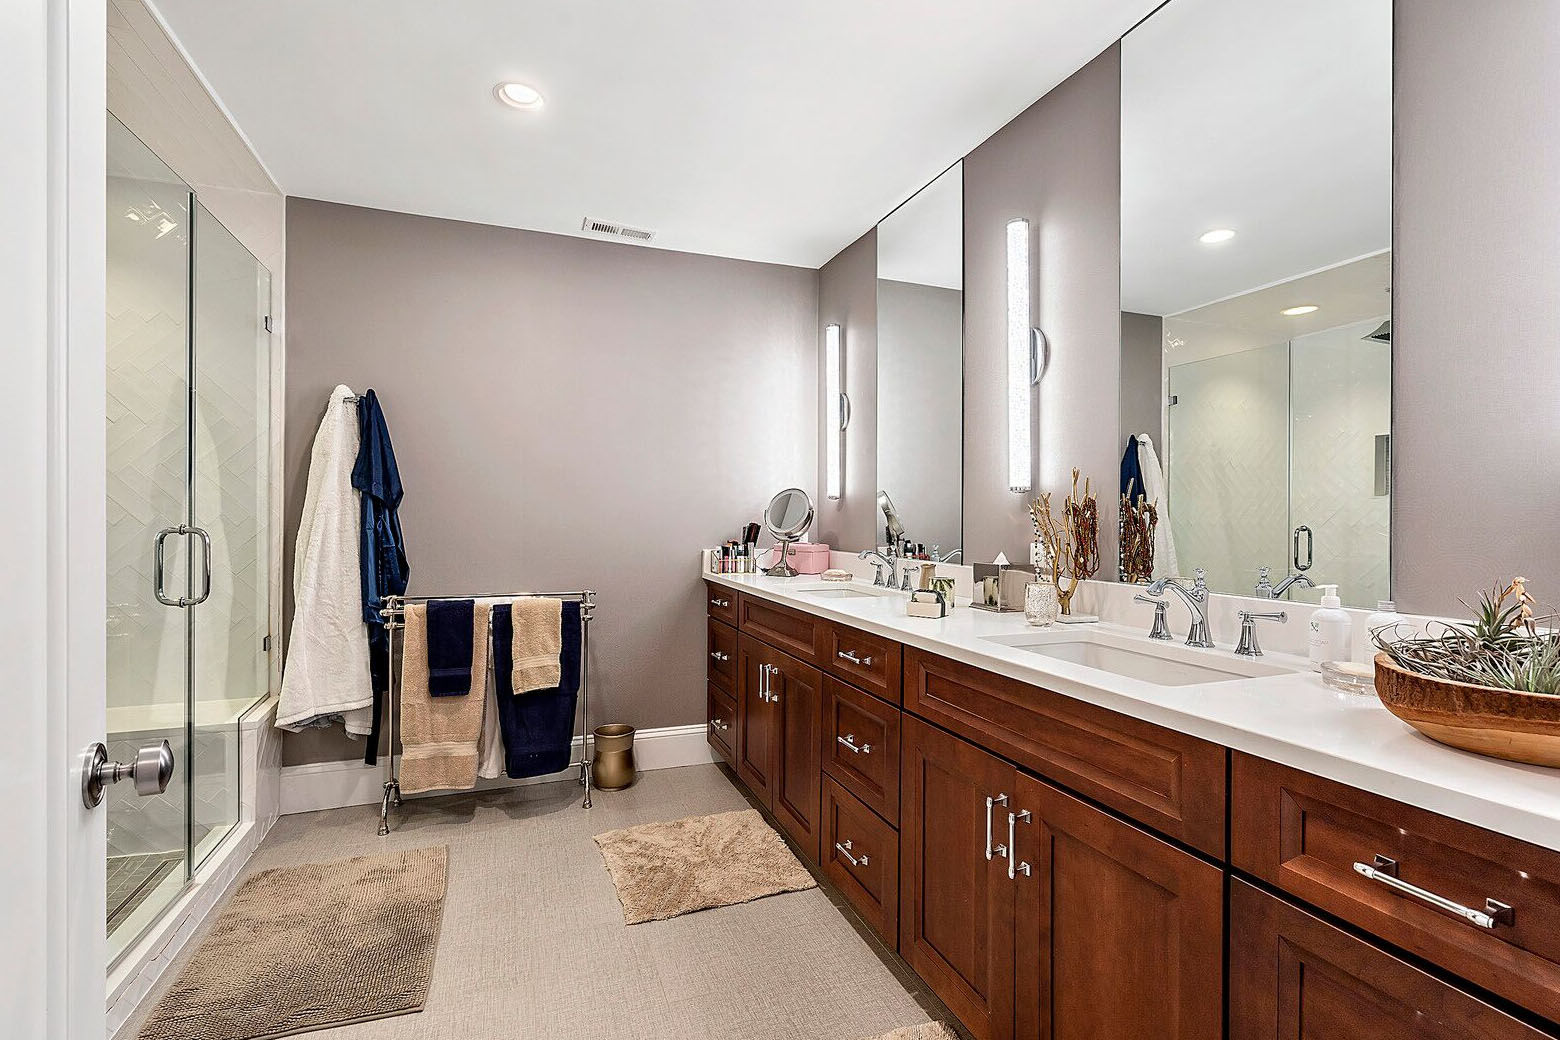 The four-bedroom, four-bathroom house on Kensington Street in Arlington, Virginia, was extensively renovated over the past 18 months. (Courtesy Century 21 New Millennium/RealMarkets)